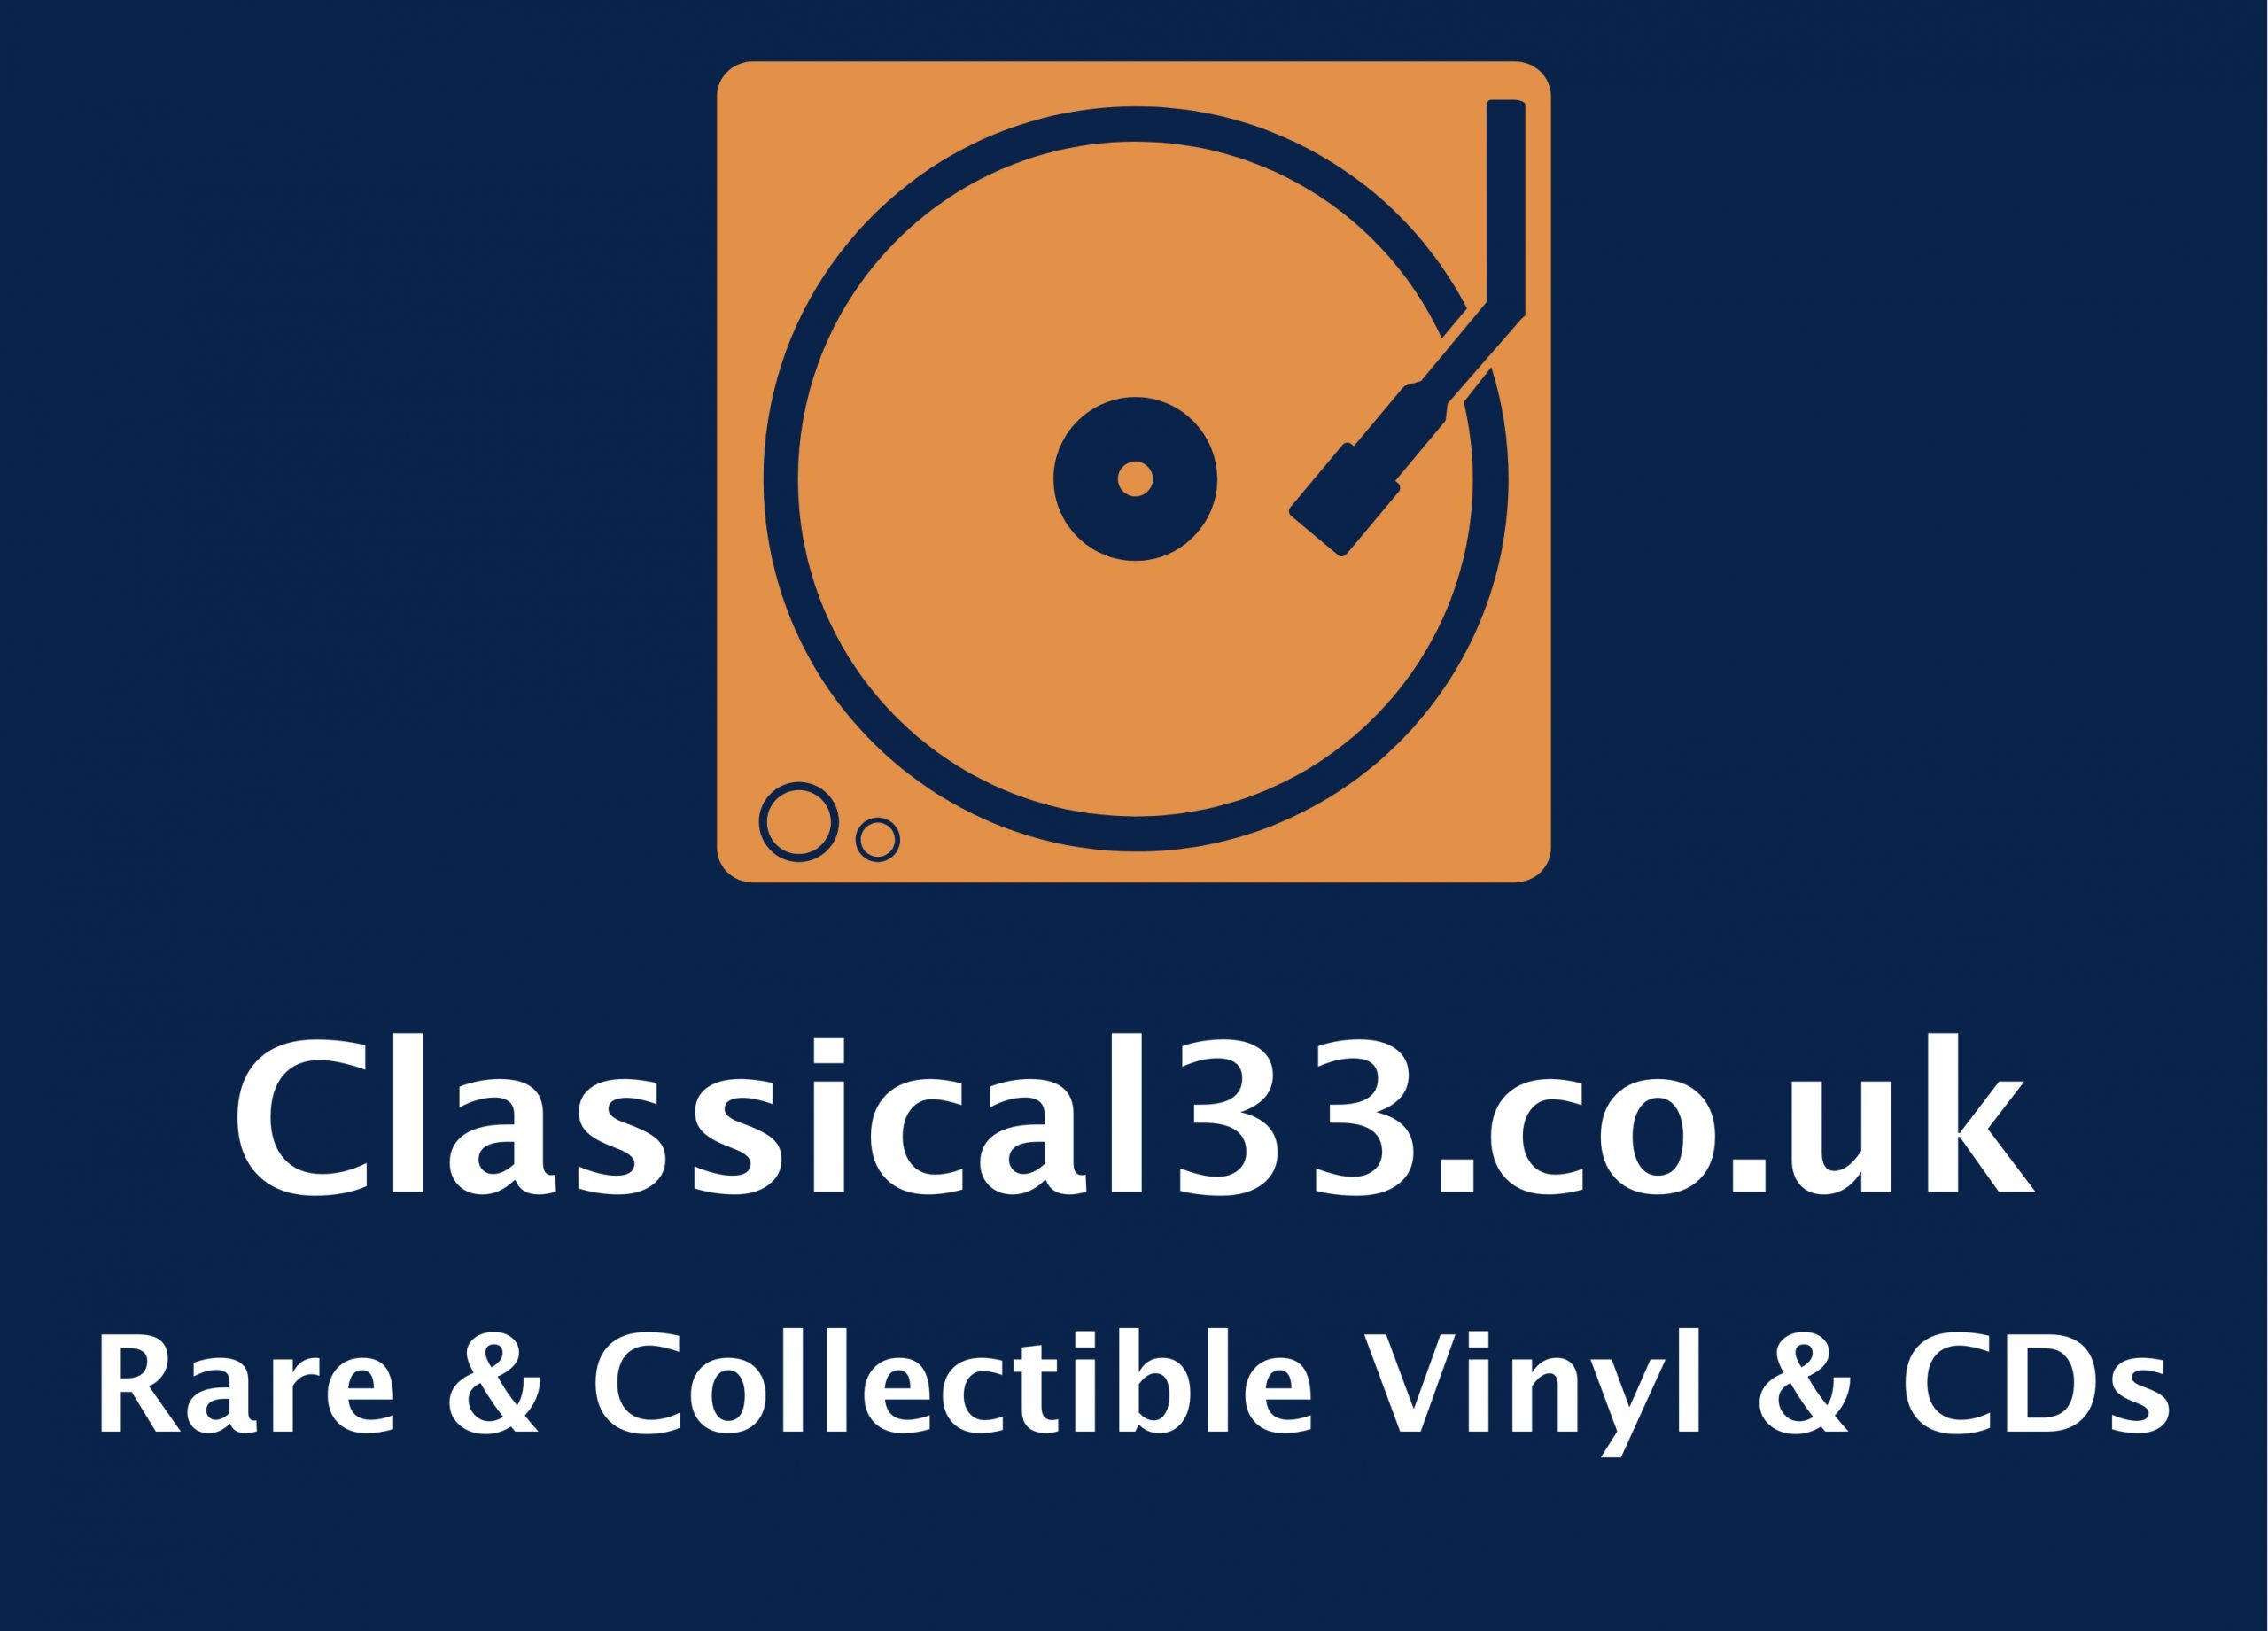 Vinyl Records and CDs For Sale Online UK Shop – Classical33.co.uk